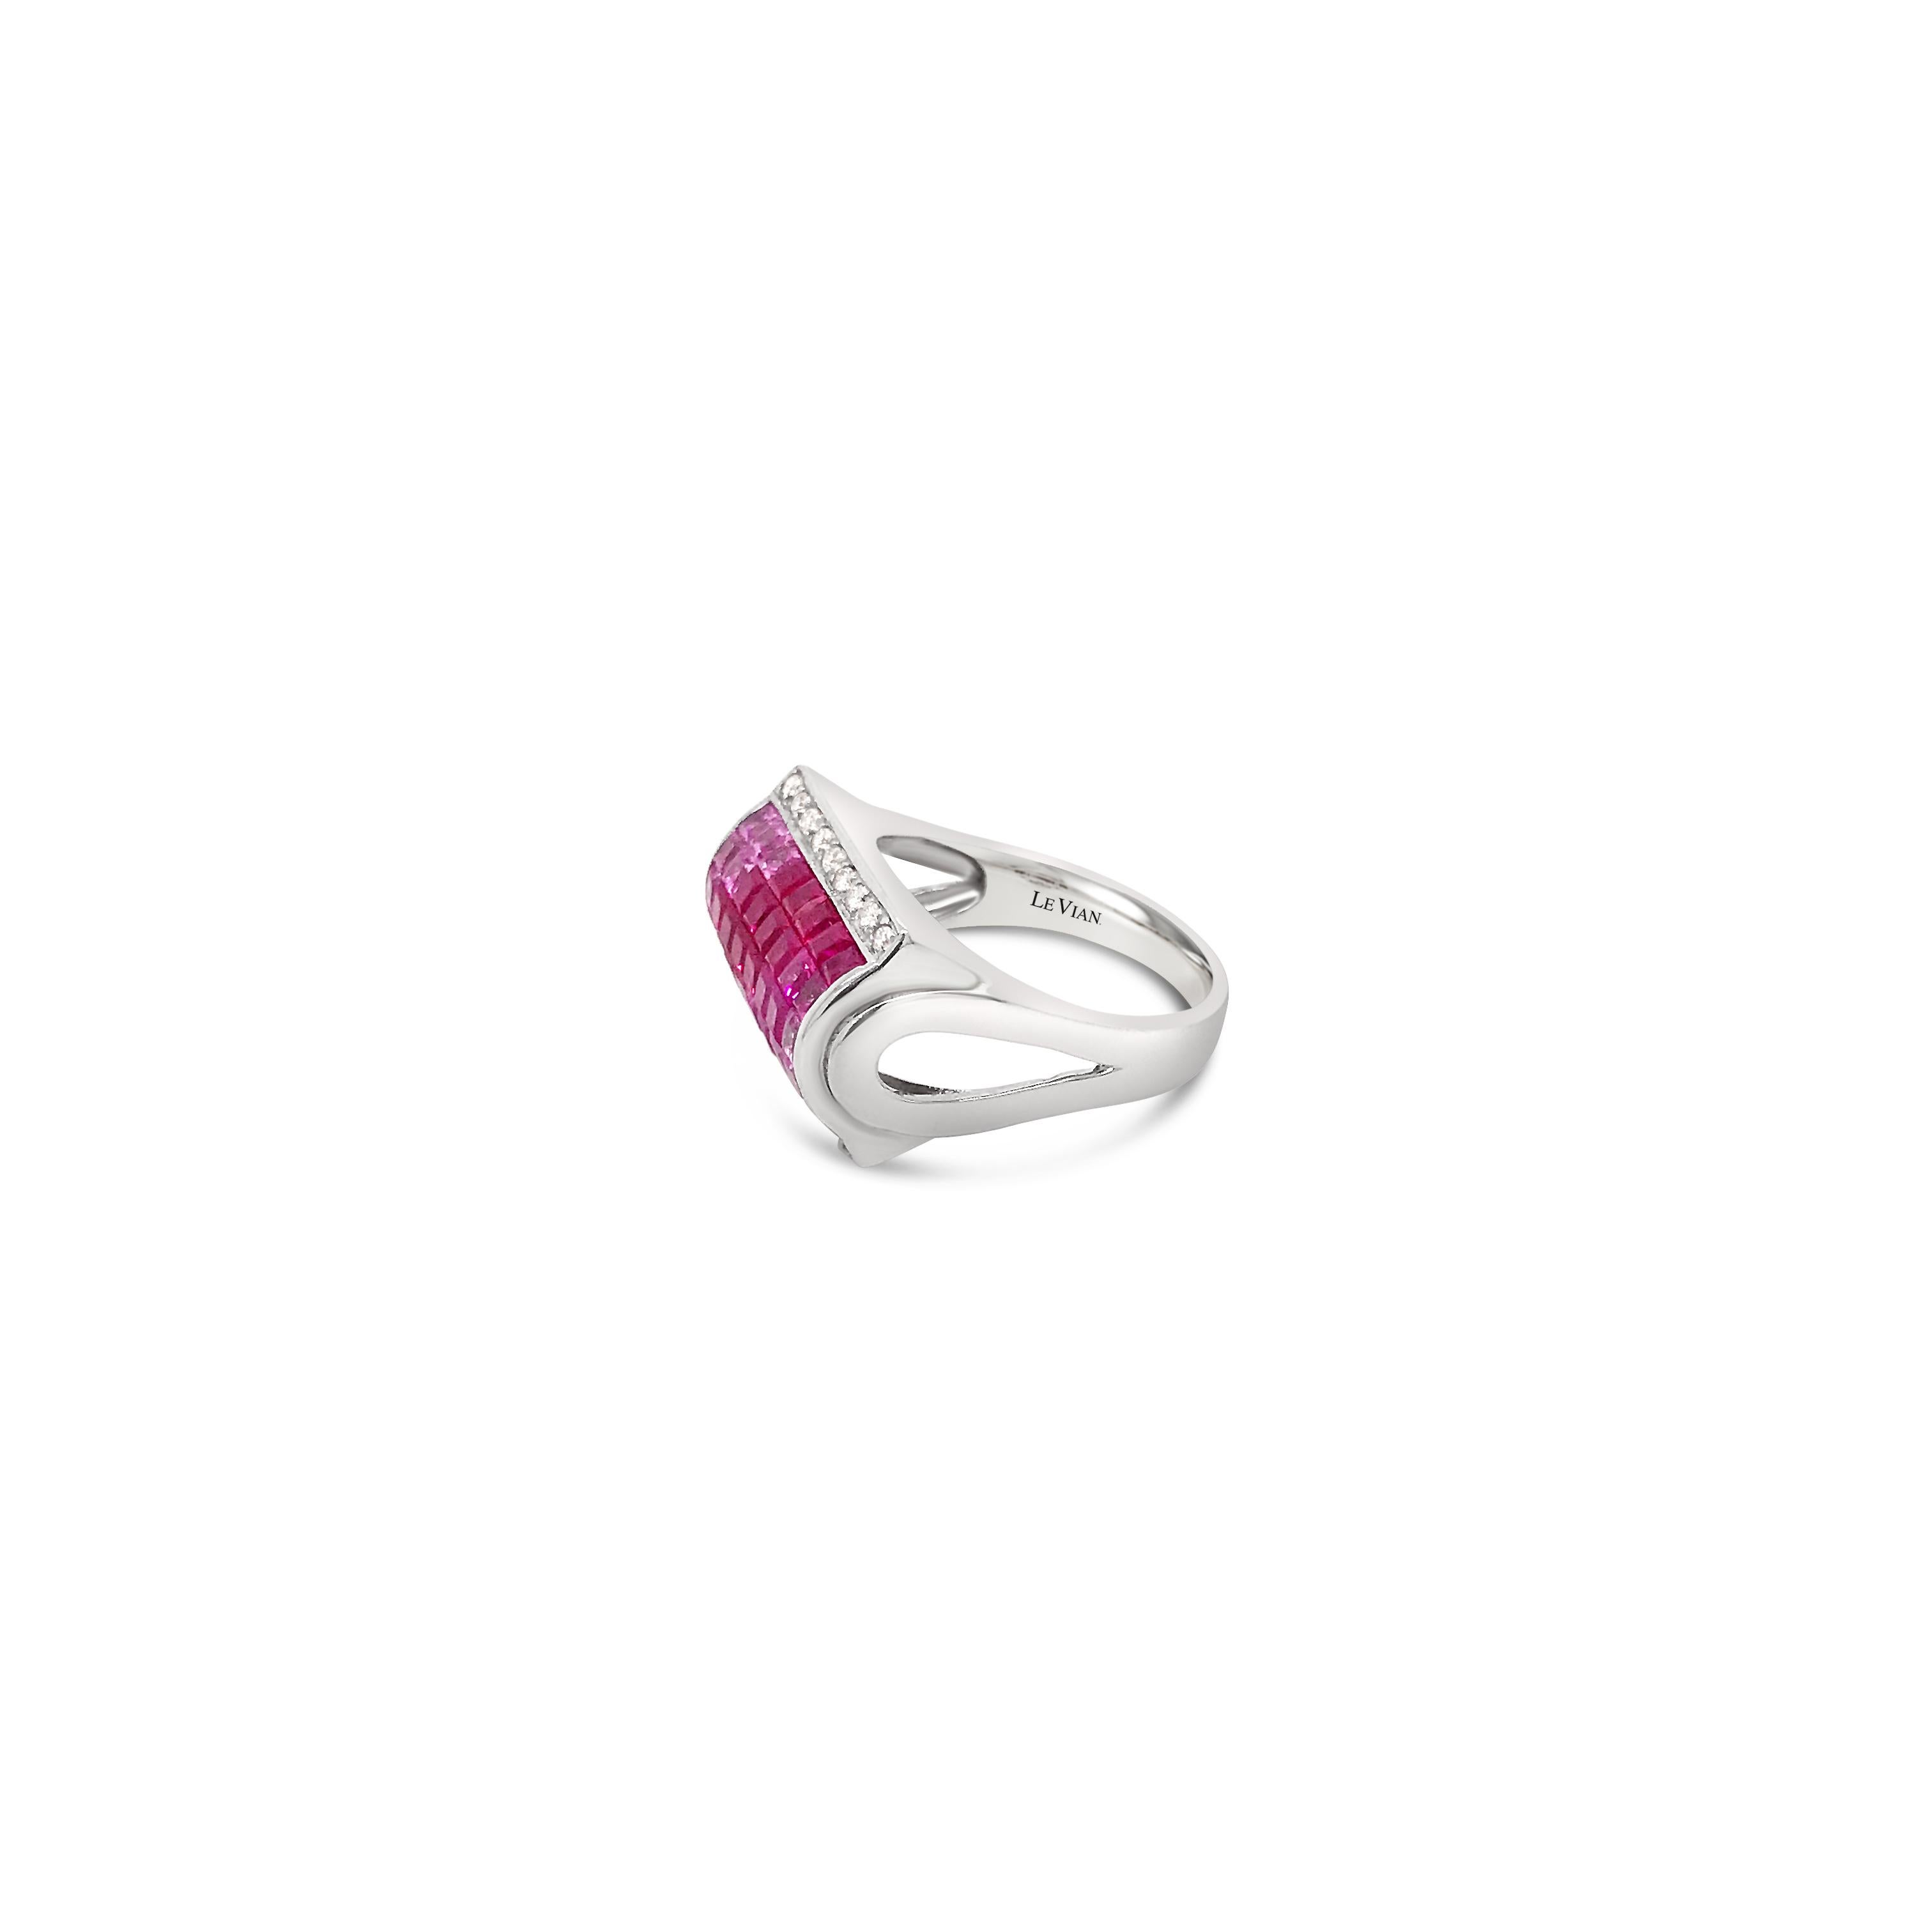 Grand Sample Sale Ring featuring 3/4 cts. Bubble Gum Pink Sapphire™, 1  1/5 cts. Passion Ruby™, 1/5 cts. Vanilla Diamonds®  set in 14K Vanilla Gold®
